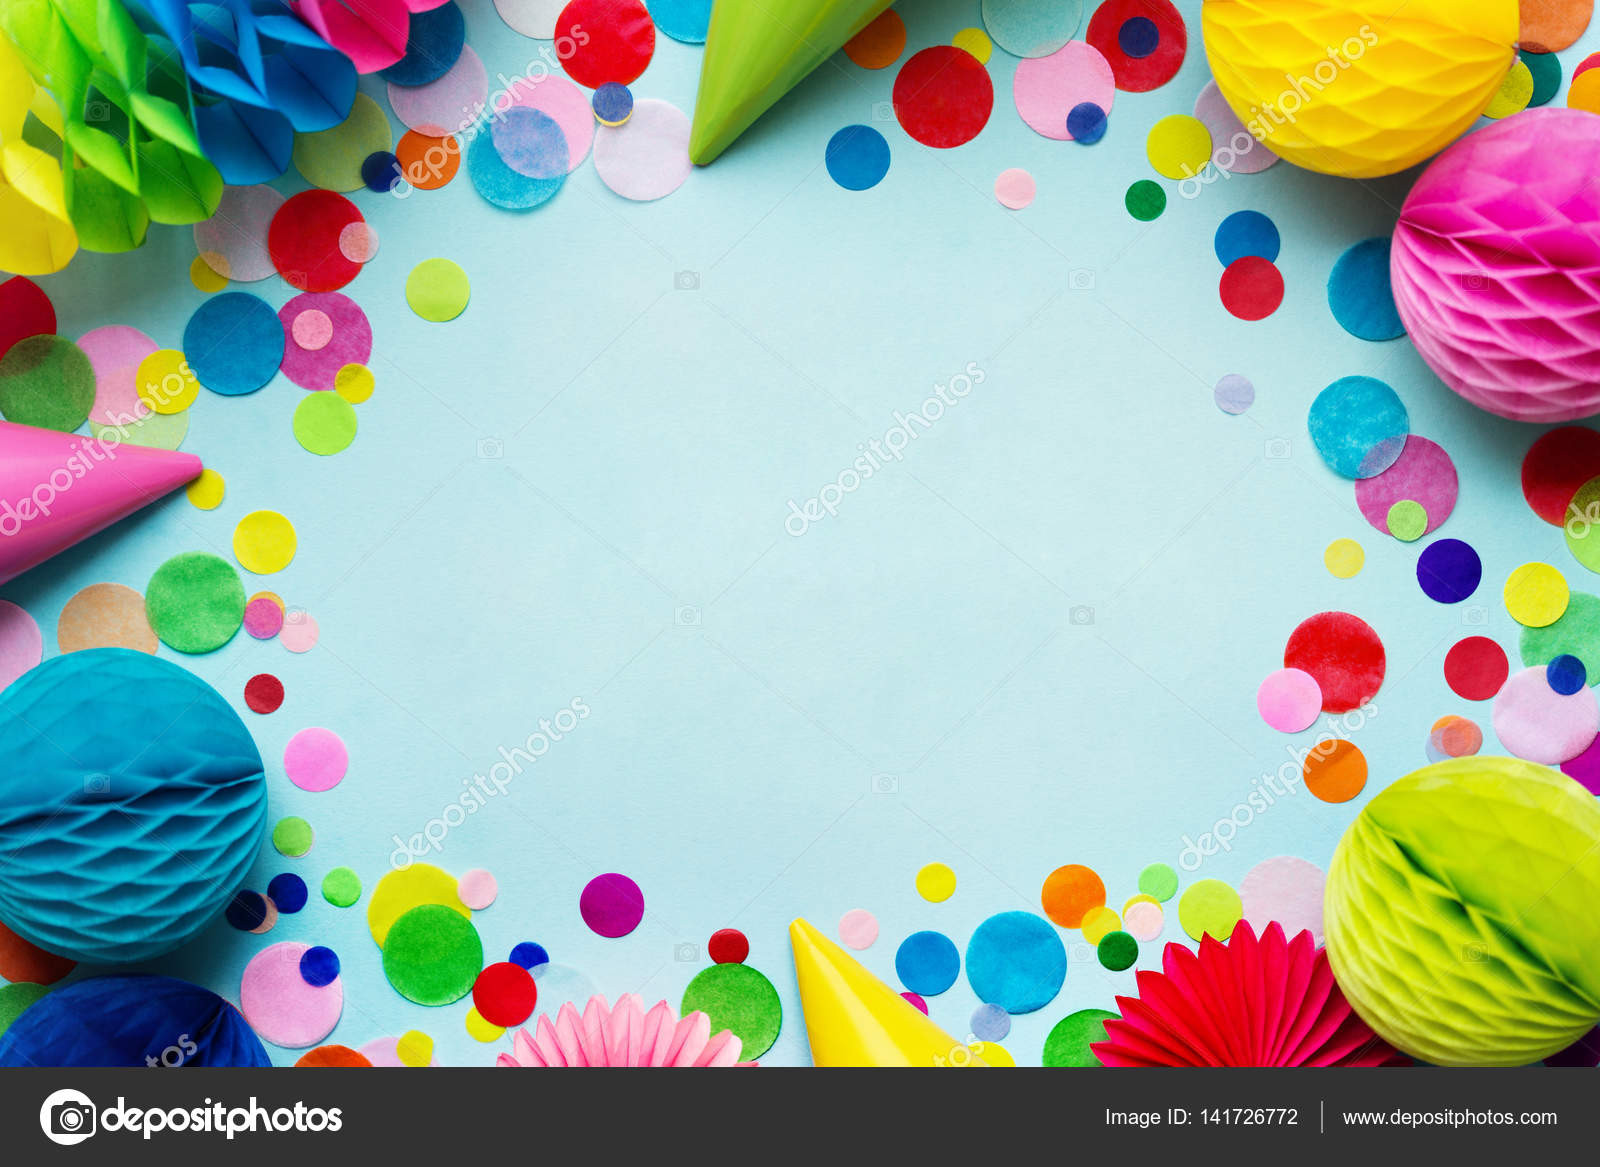 Birthday Party Background
 Colorful birthday party background — Stock